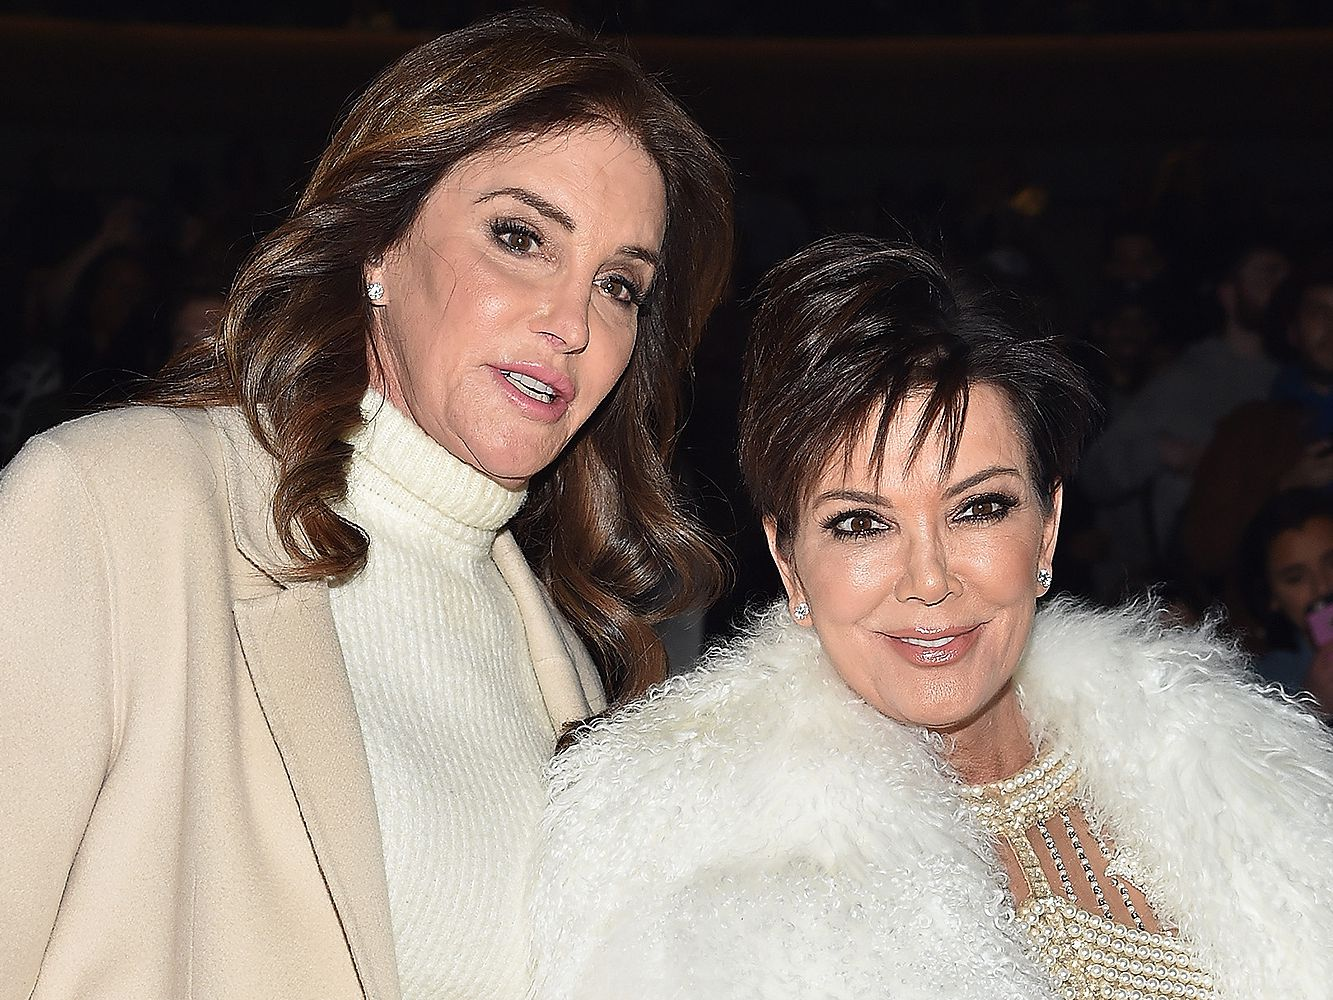 Caitlyn Jenner Family and Relationships